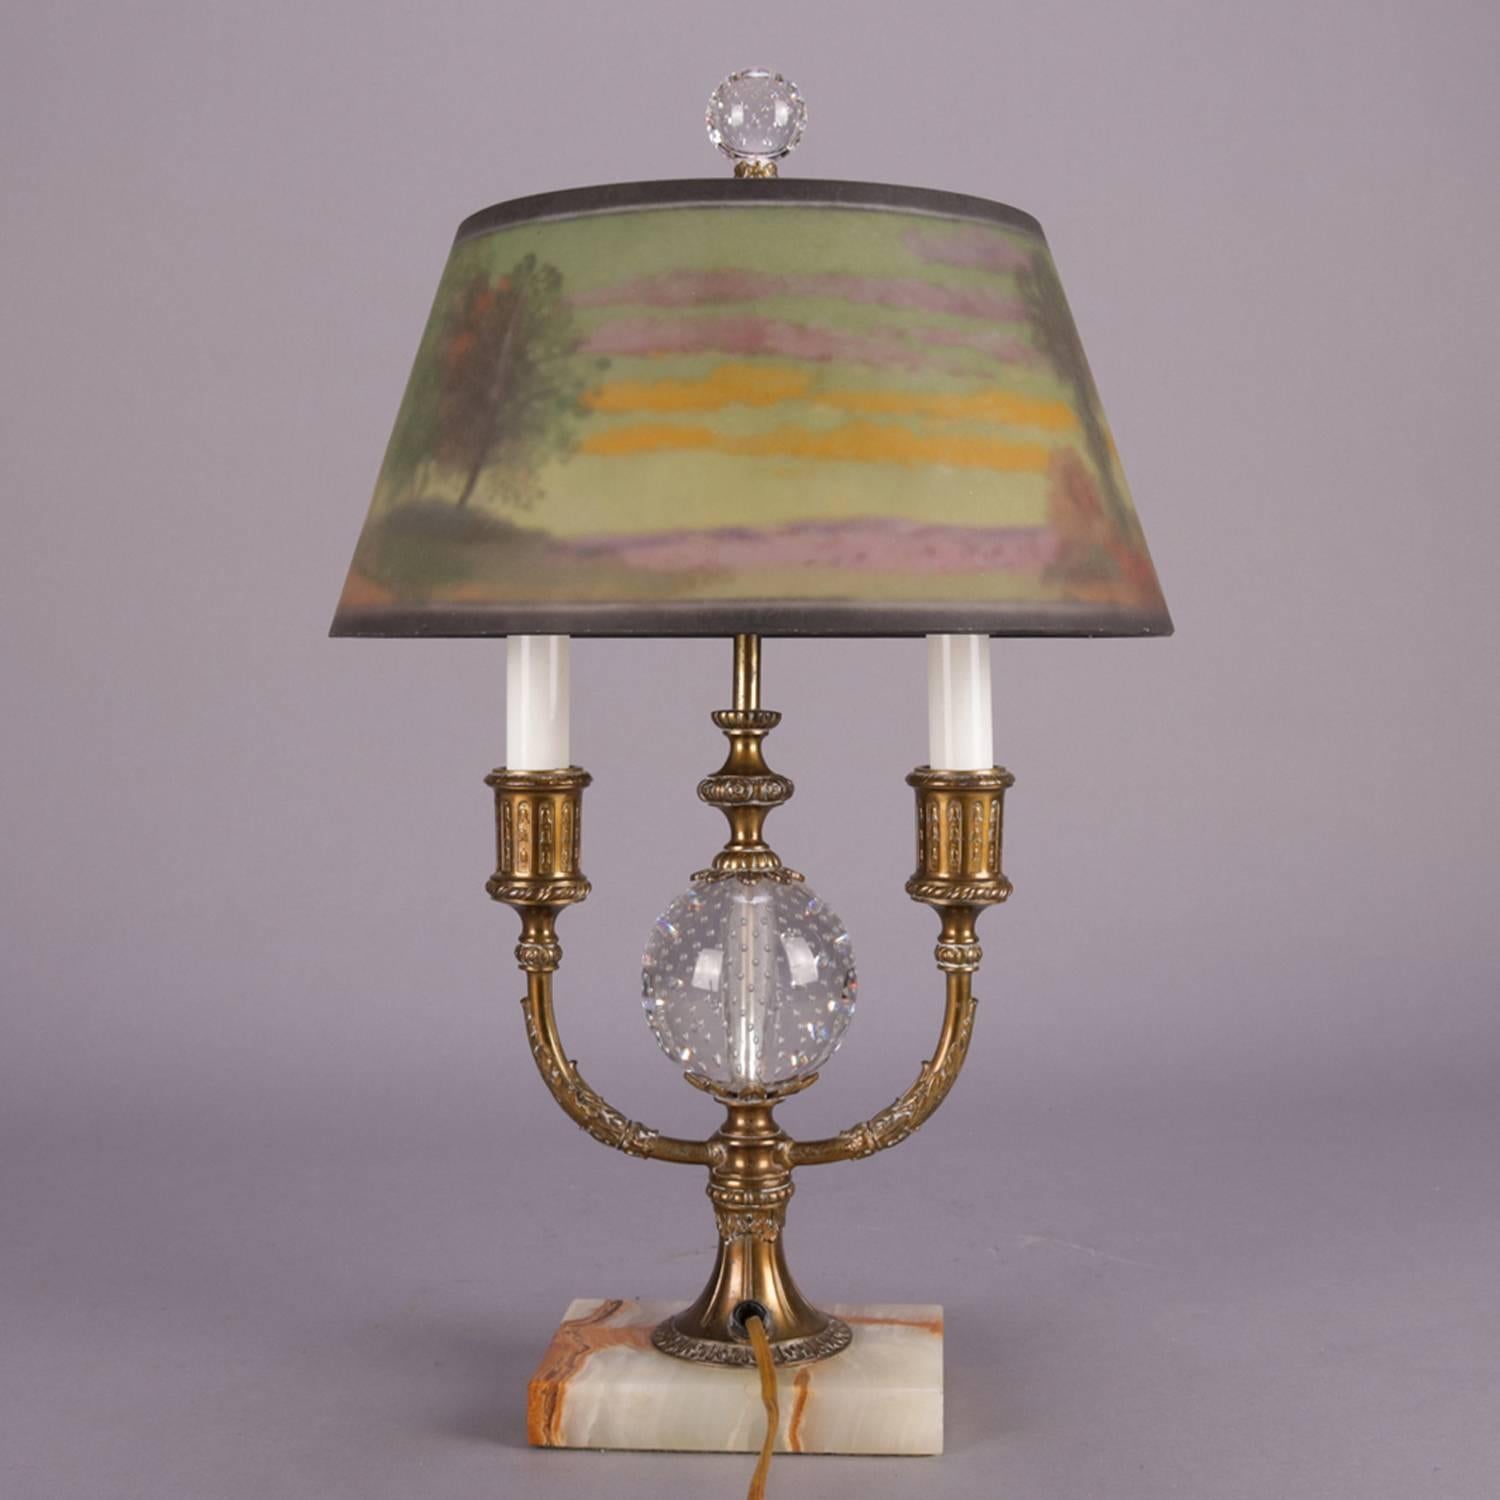 Marble Pairpoint Reverse Painted Directorie Table Lamp, Artist Signed L.H. Gorham